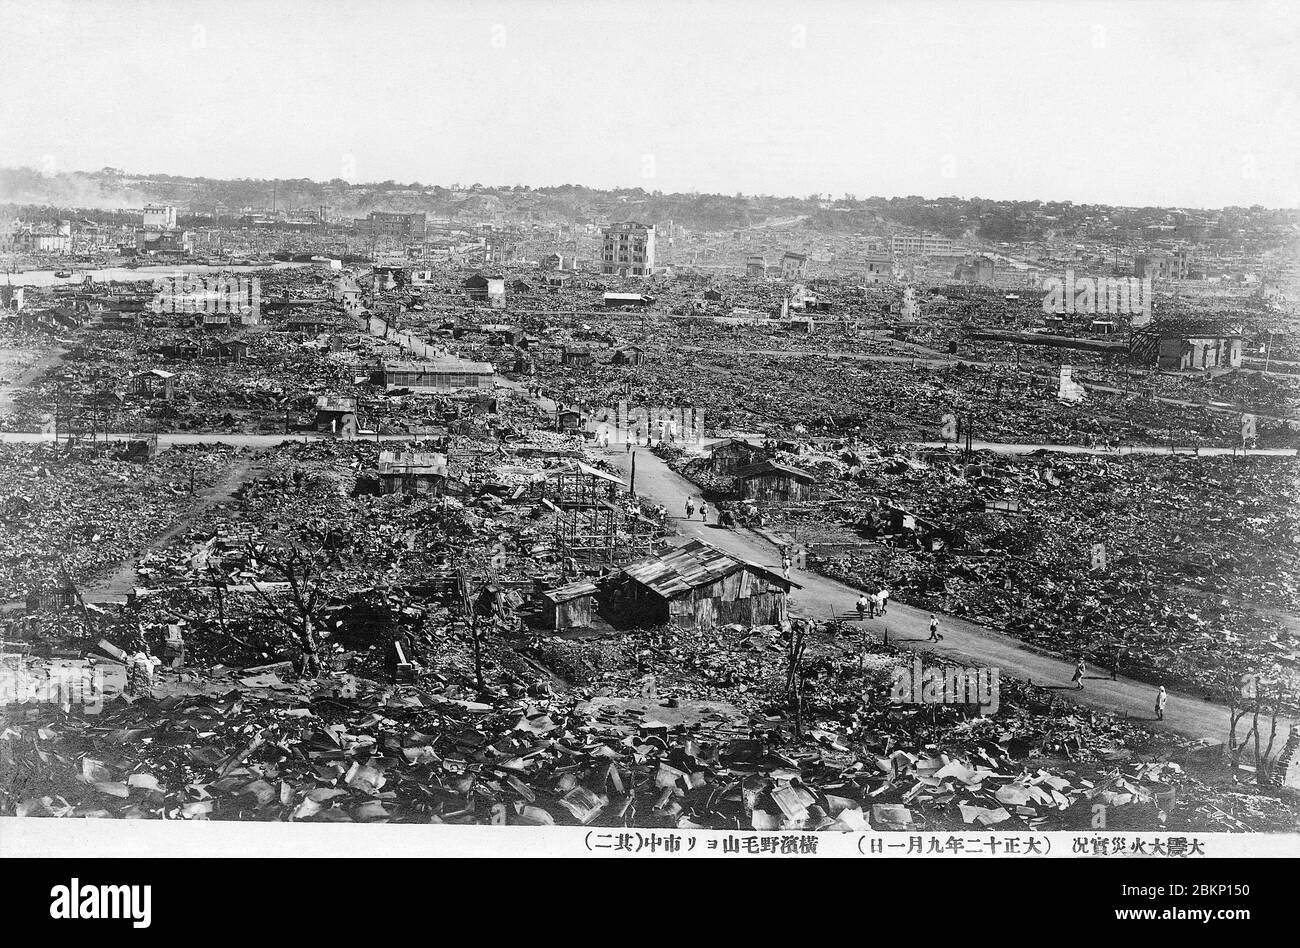 [ 1920s Japan - Yokohama Destroyed by the Great Kanto Earthquake ] —   The ruins of Yokohama after the Great Kanto Earthquake of September 1, 1923 (Taisho 12). The photographer took this sobering photo from  Noge-Yama.  The quake, with an estimated magnitude between 7.9 and 8.4 on the Richter scale, devastated Tokyo, the port city of Yokohama, surrounding prefectures of Chiba, Kanagawa, and Shizuoka, and claimed over 140,000 victims.  Photo number 2 of 4.  20th century vintage postcard. Stock Photo